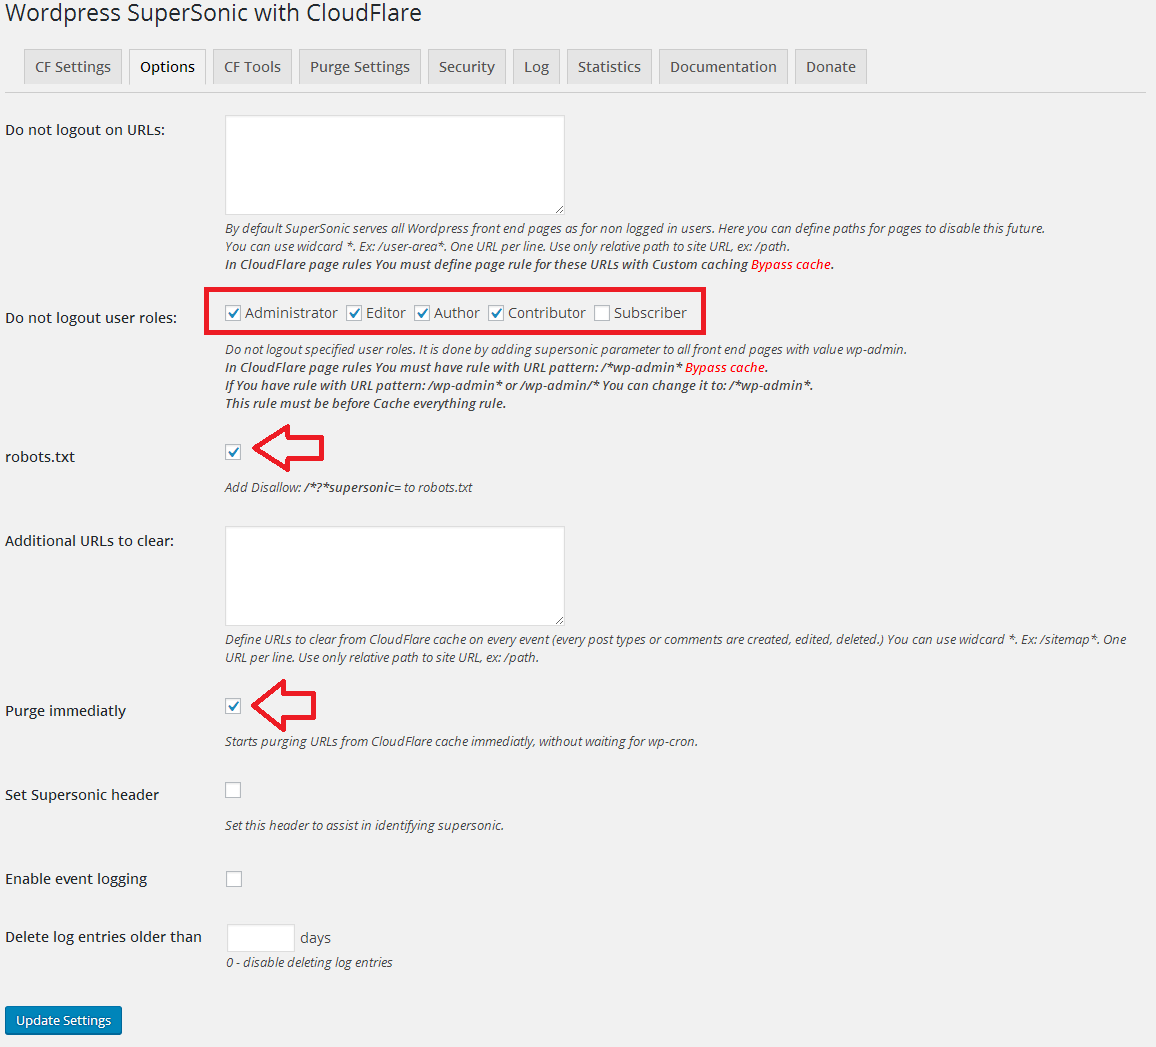 Step7.7 CloudFlare SuperSonic Options Tab